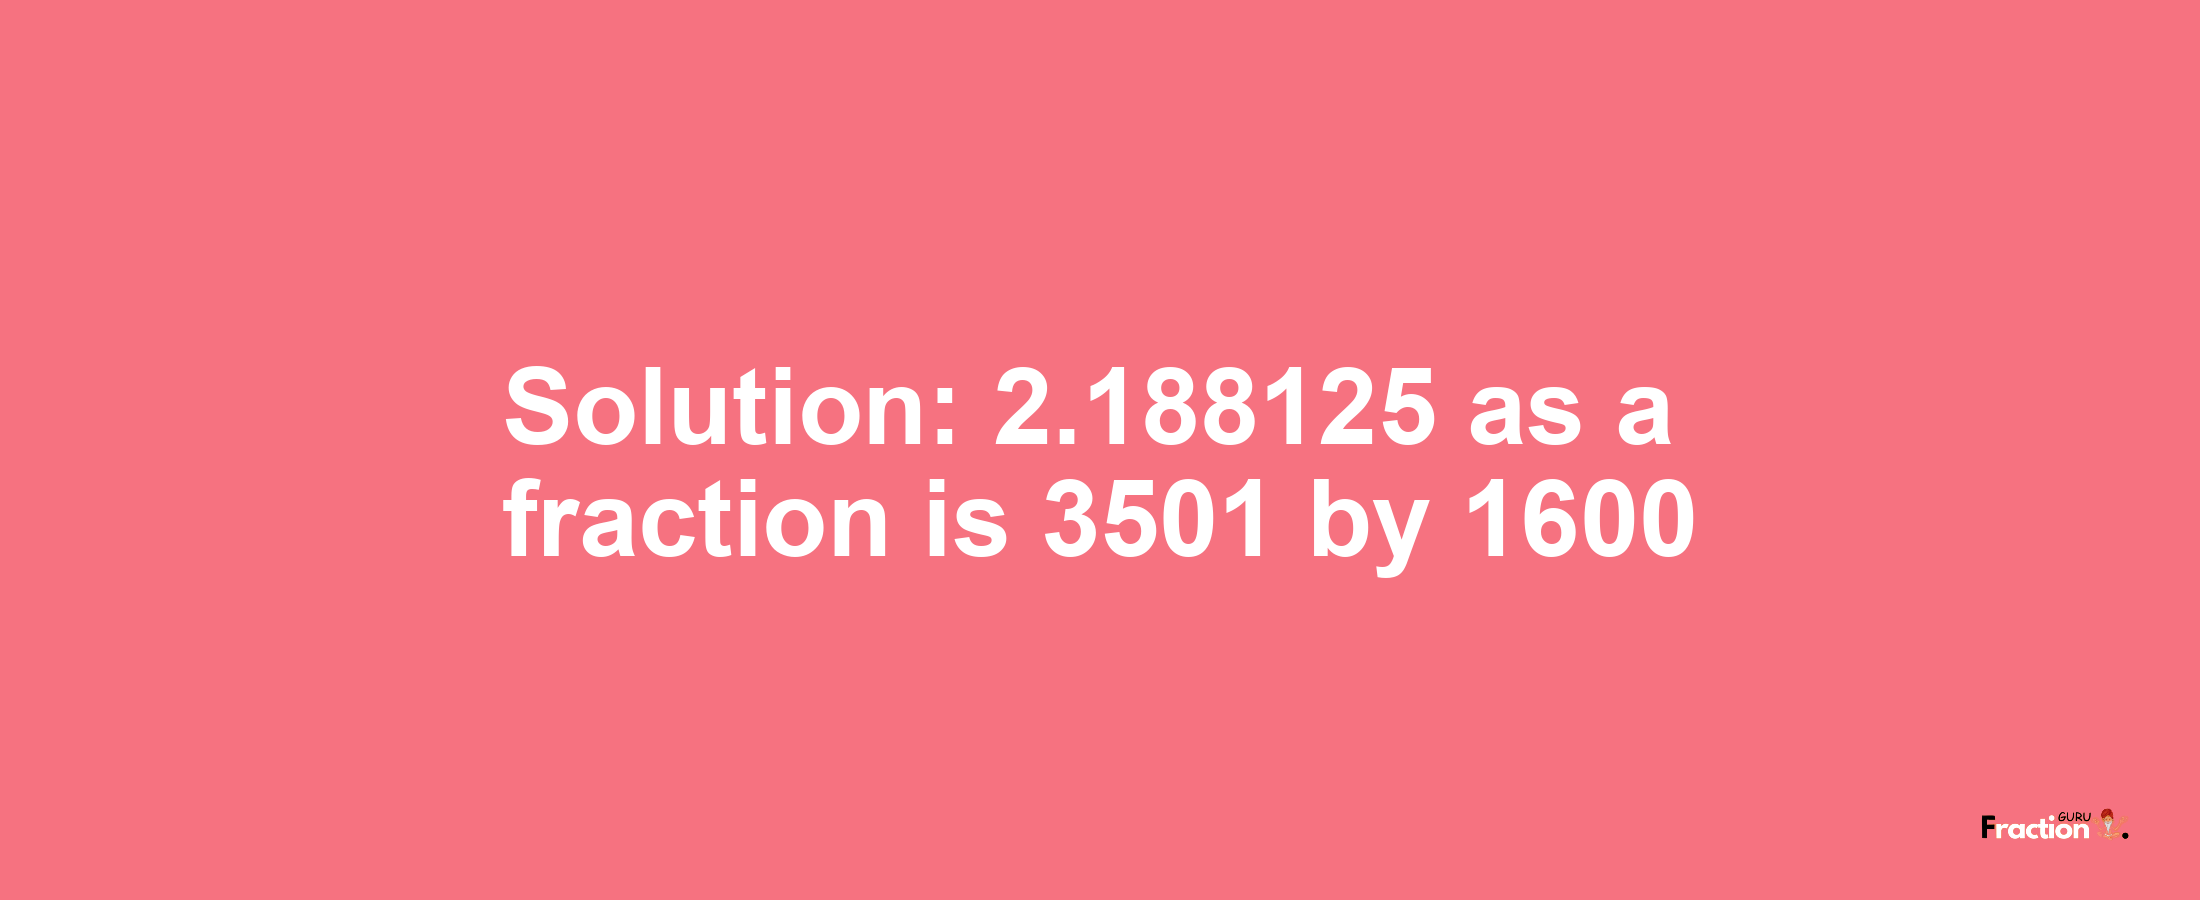 Solution:2.188125 as a fraction is 3501/1600